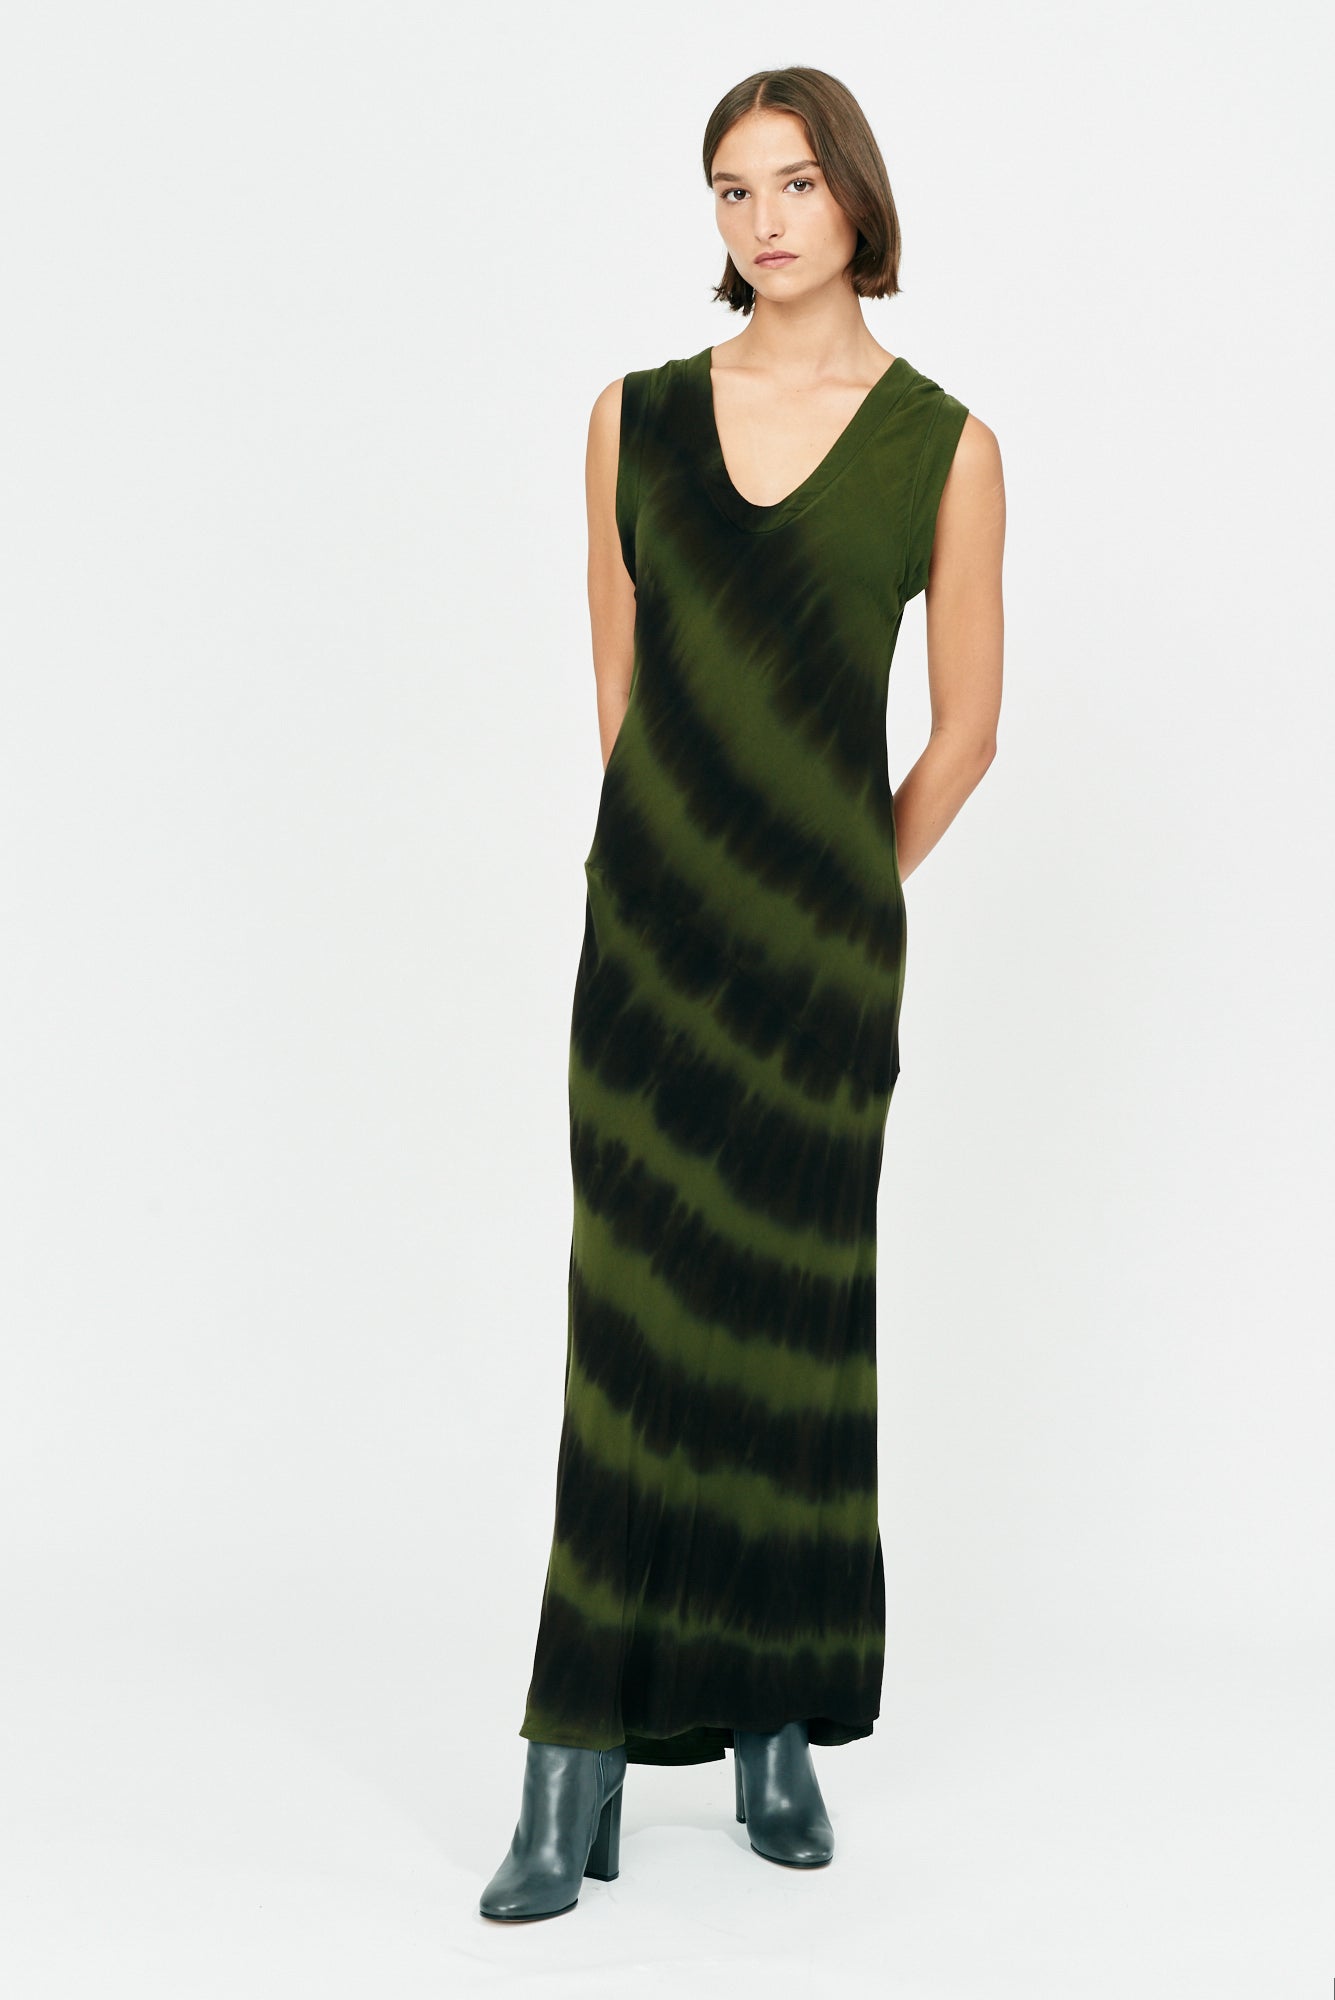 Forest Black and Stripes Tie Dye Ghost Ranch Soft Twill Kennedy Dress Full Front View